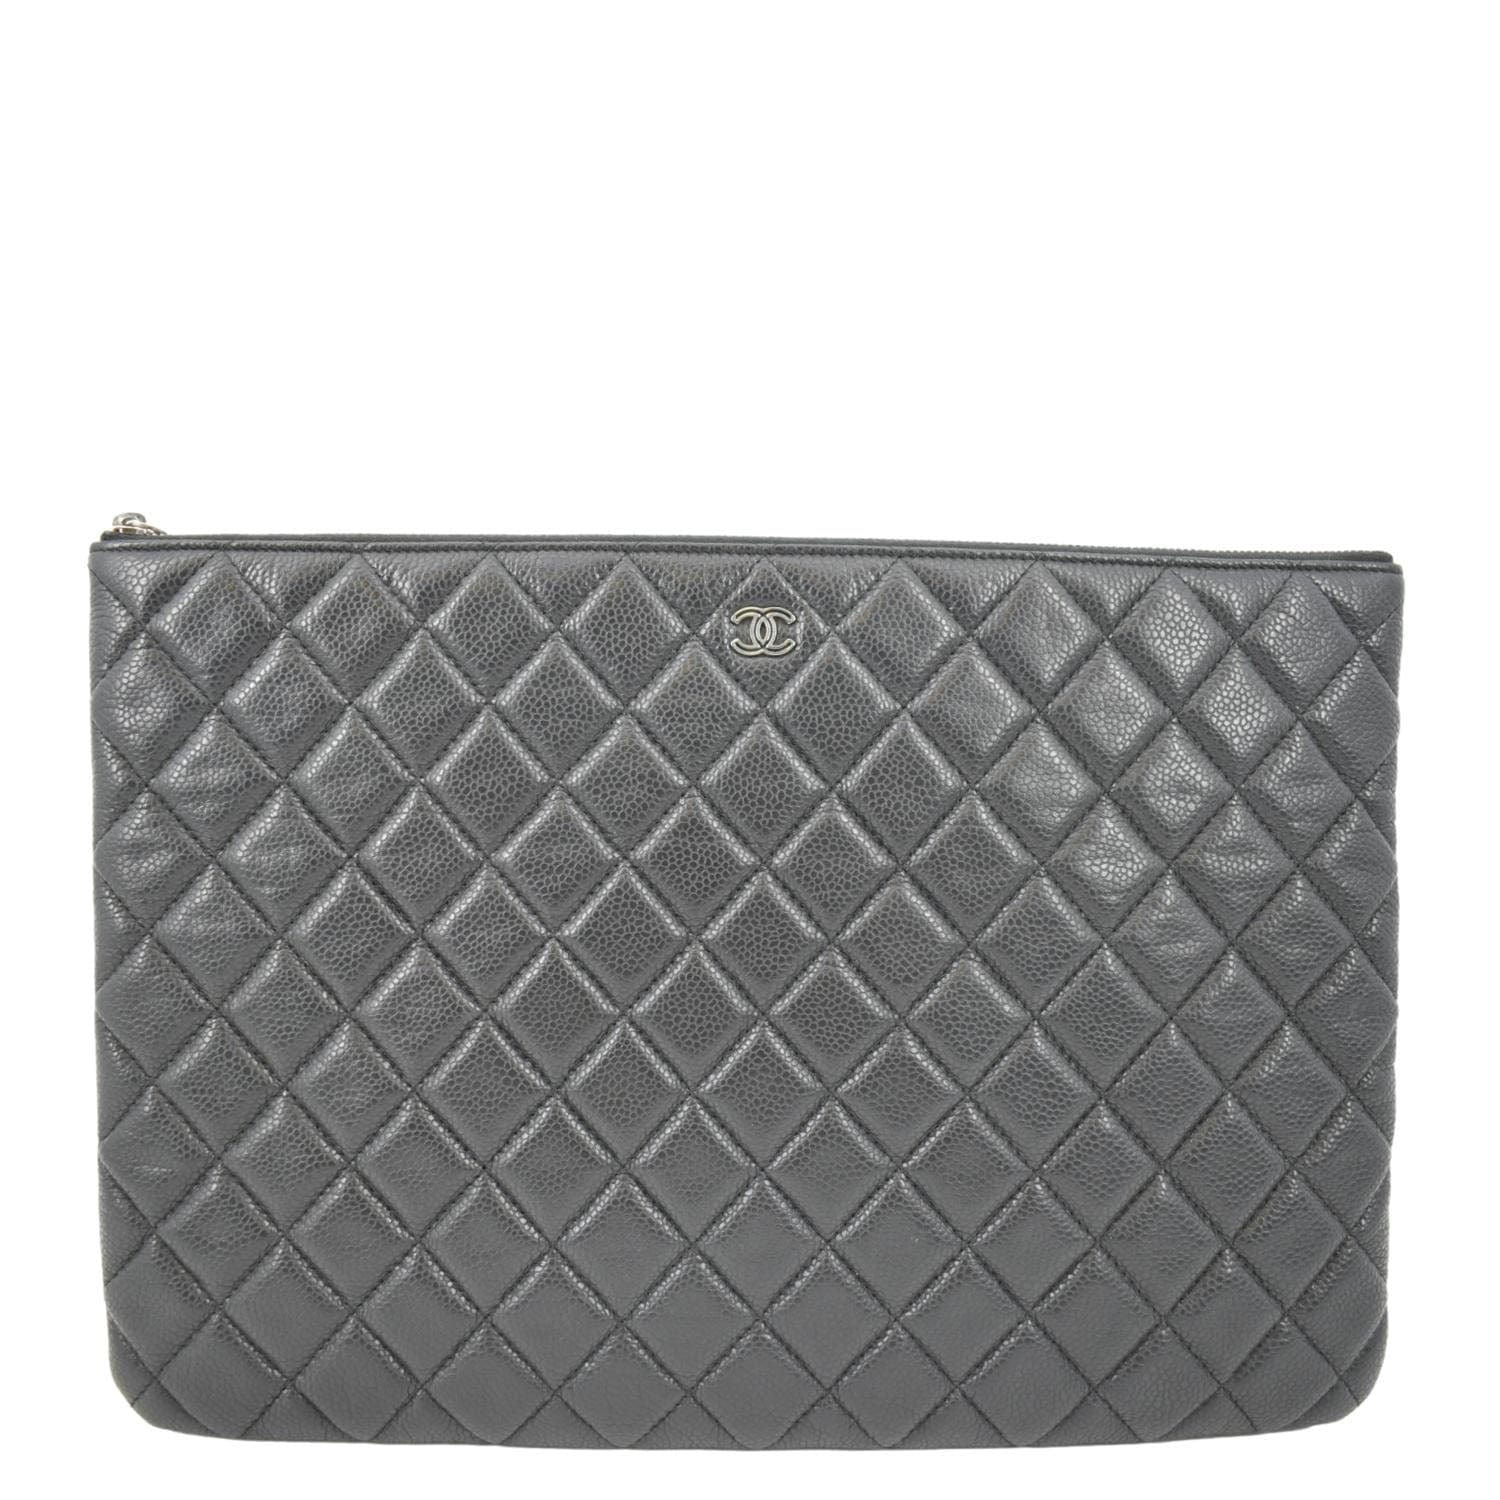 Chanel Classic O-Case Caviar Leather Zip Pouch